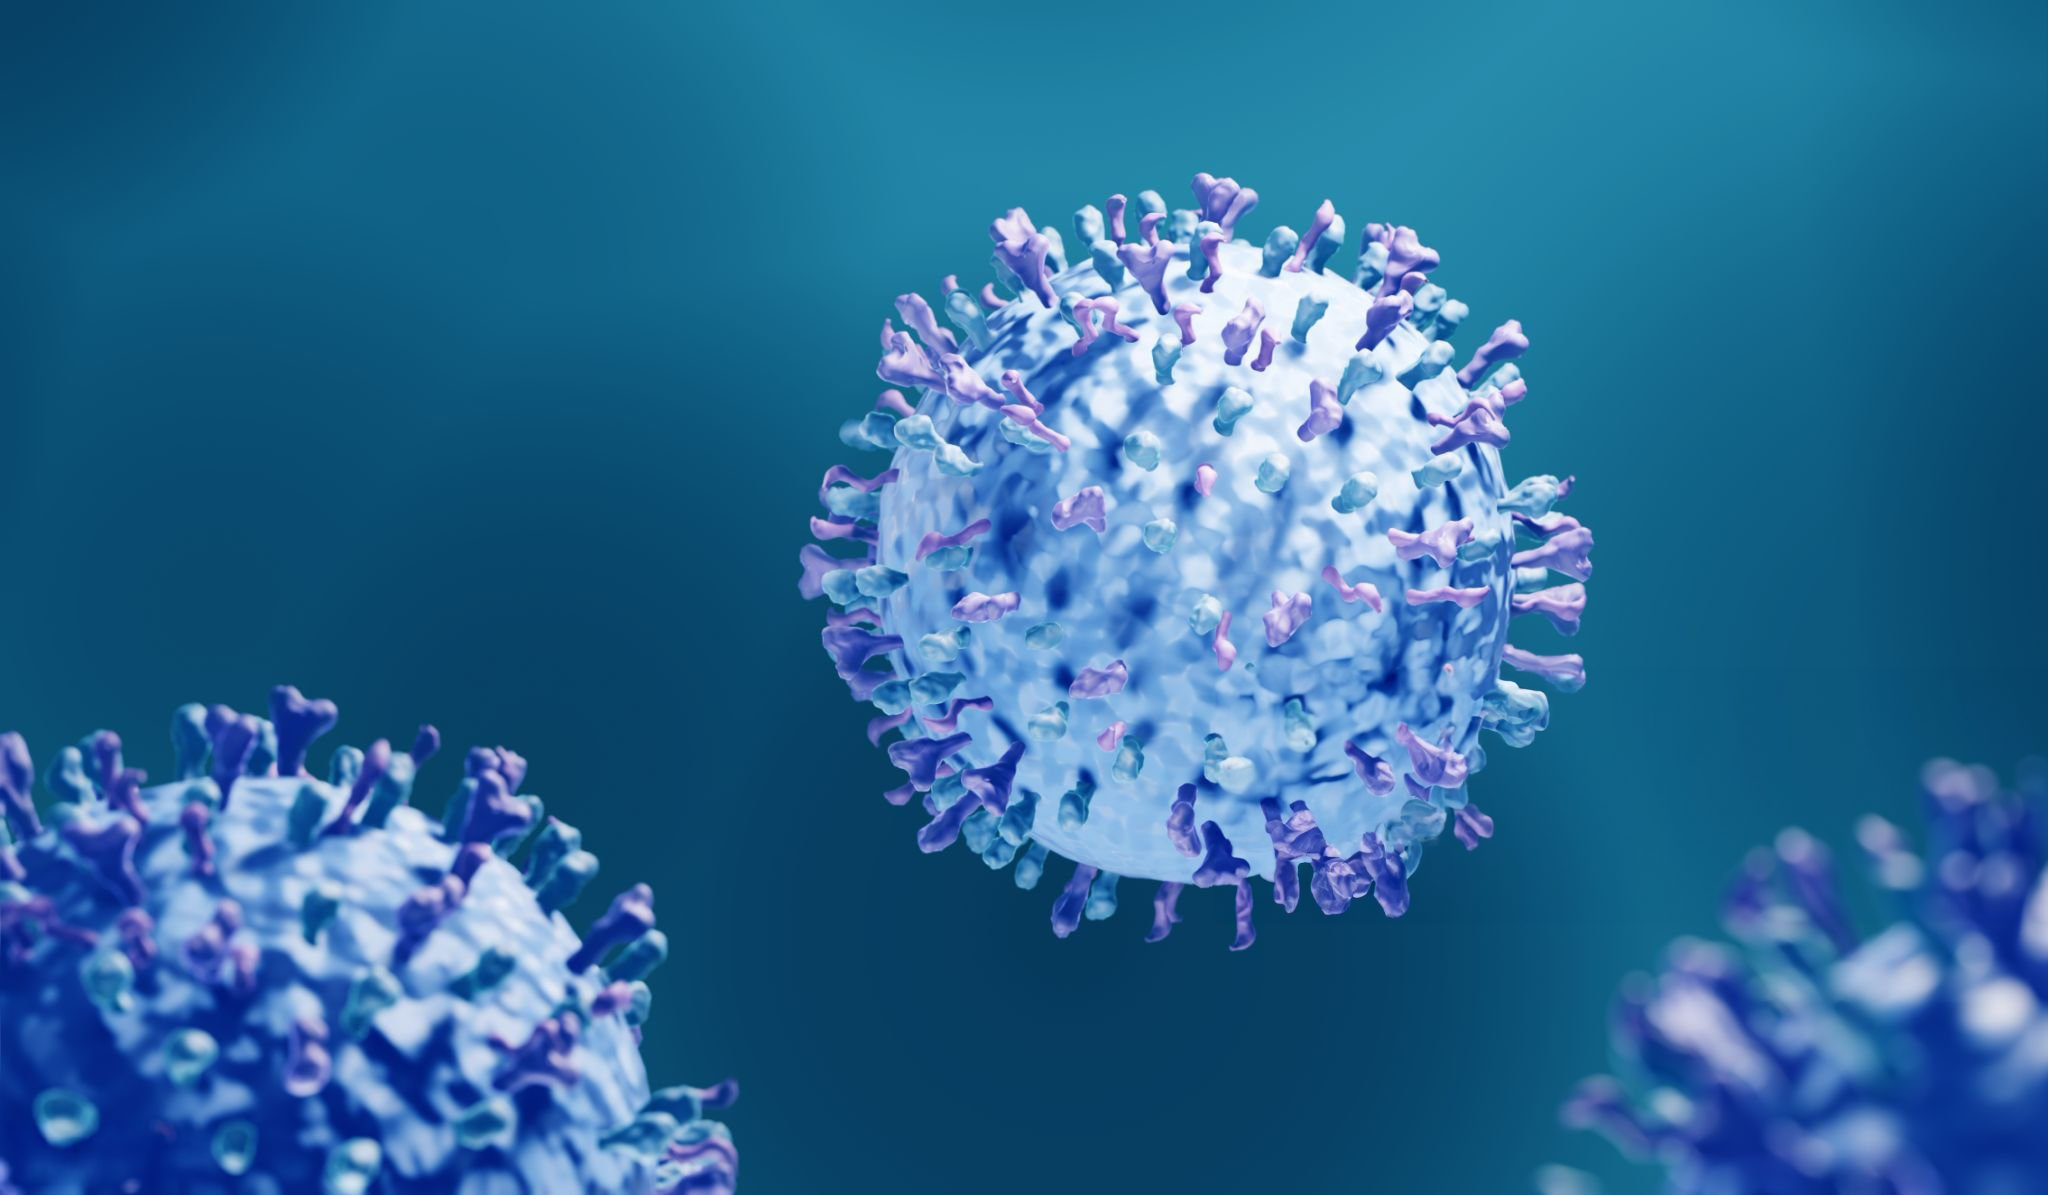 The image shows a close-up, 3D rendering of the Respiratory Syncytial Virus (RSV) particles against a deep teal background. The virus particles are depicted with a central, spherical shape covered in protruding spikes. The spikes, rendered in shades of purple and pink, represent the glycoprotein structures on the surface of the virus, which are key to its ability to infect host cells. The virus is highly detailed, with a sense of depth and realism to the imagery, highlighting the structure that is typically not visible to the naked eye. The overall mood of the image is clinical and informative.